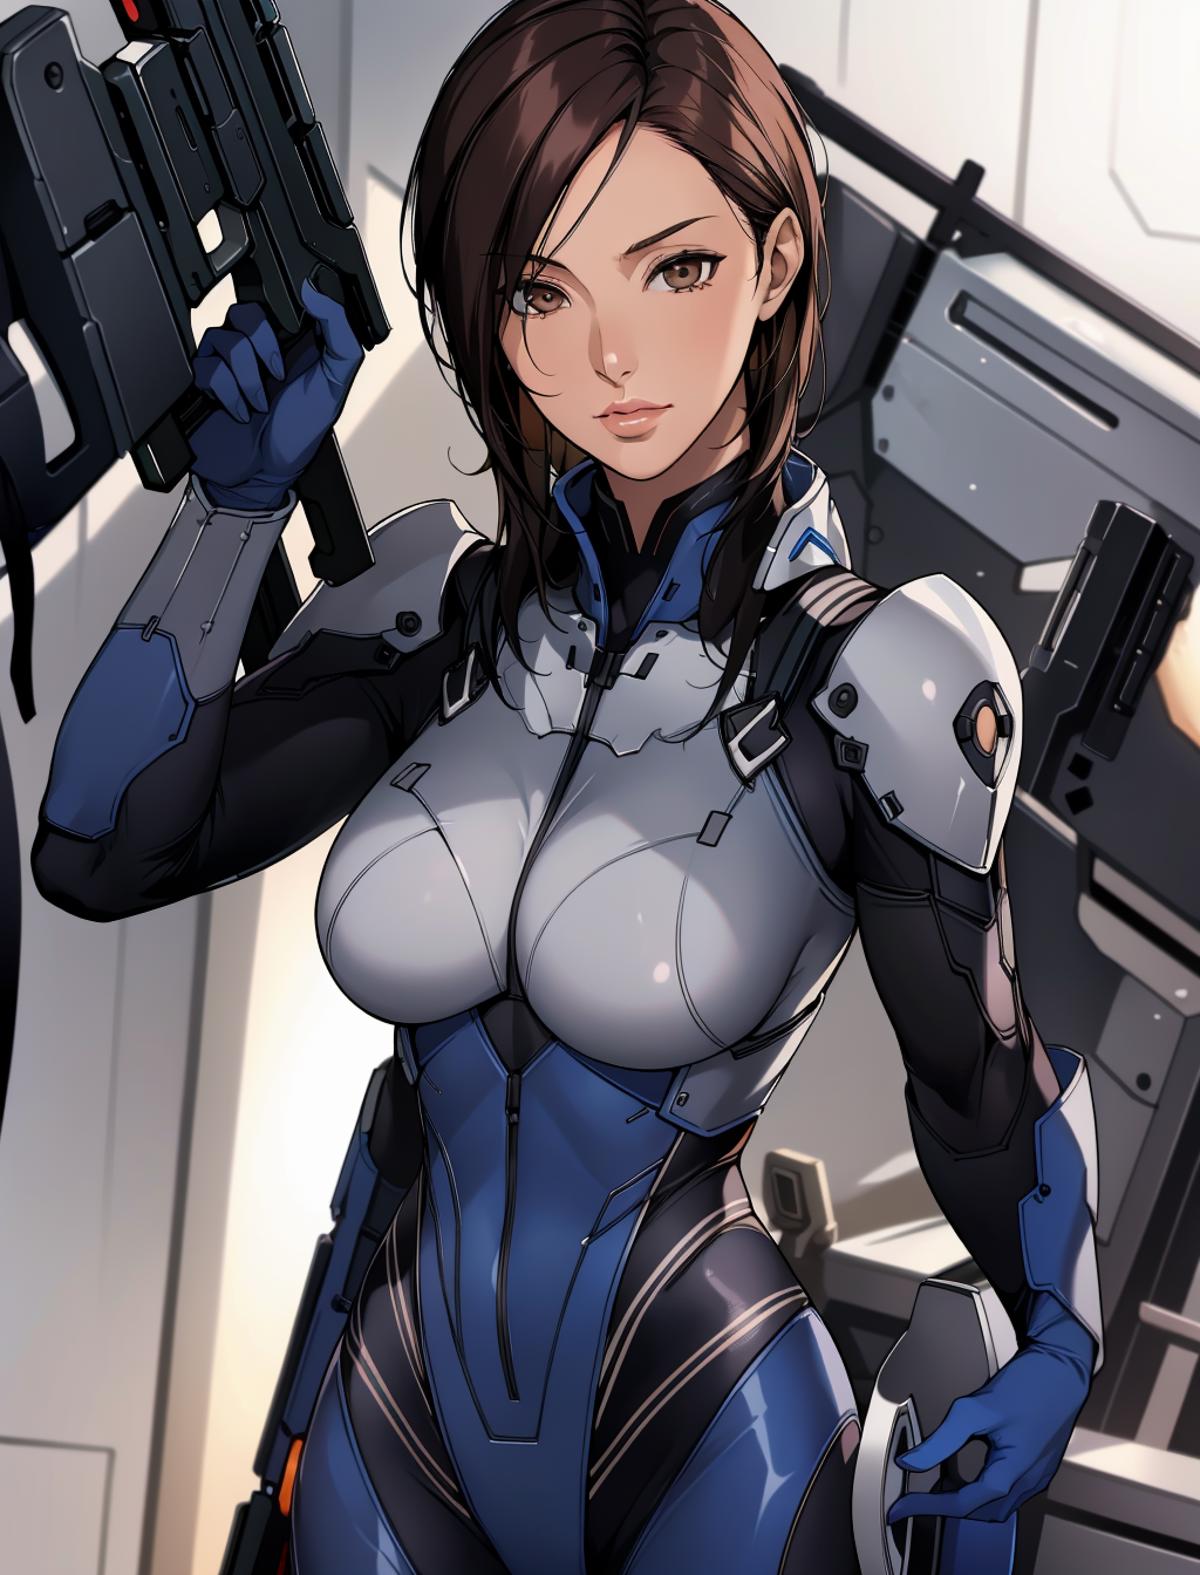 Ashley from Mass Effect image by Zileans